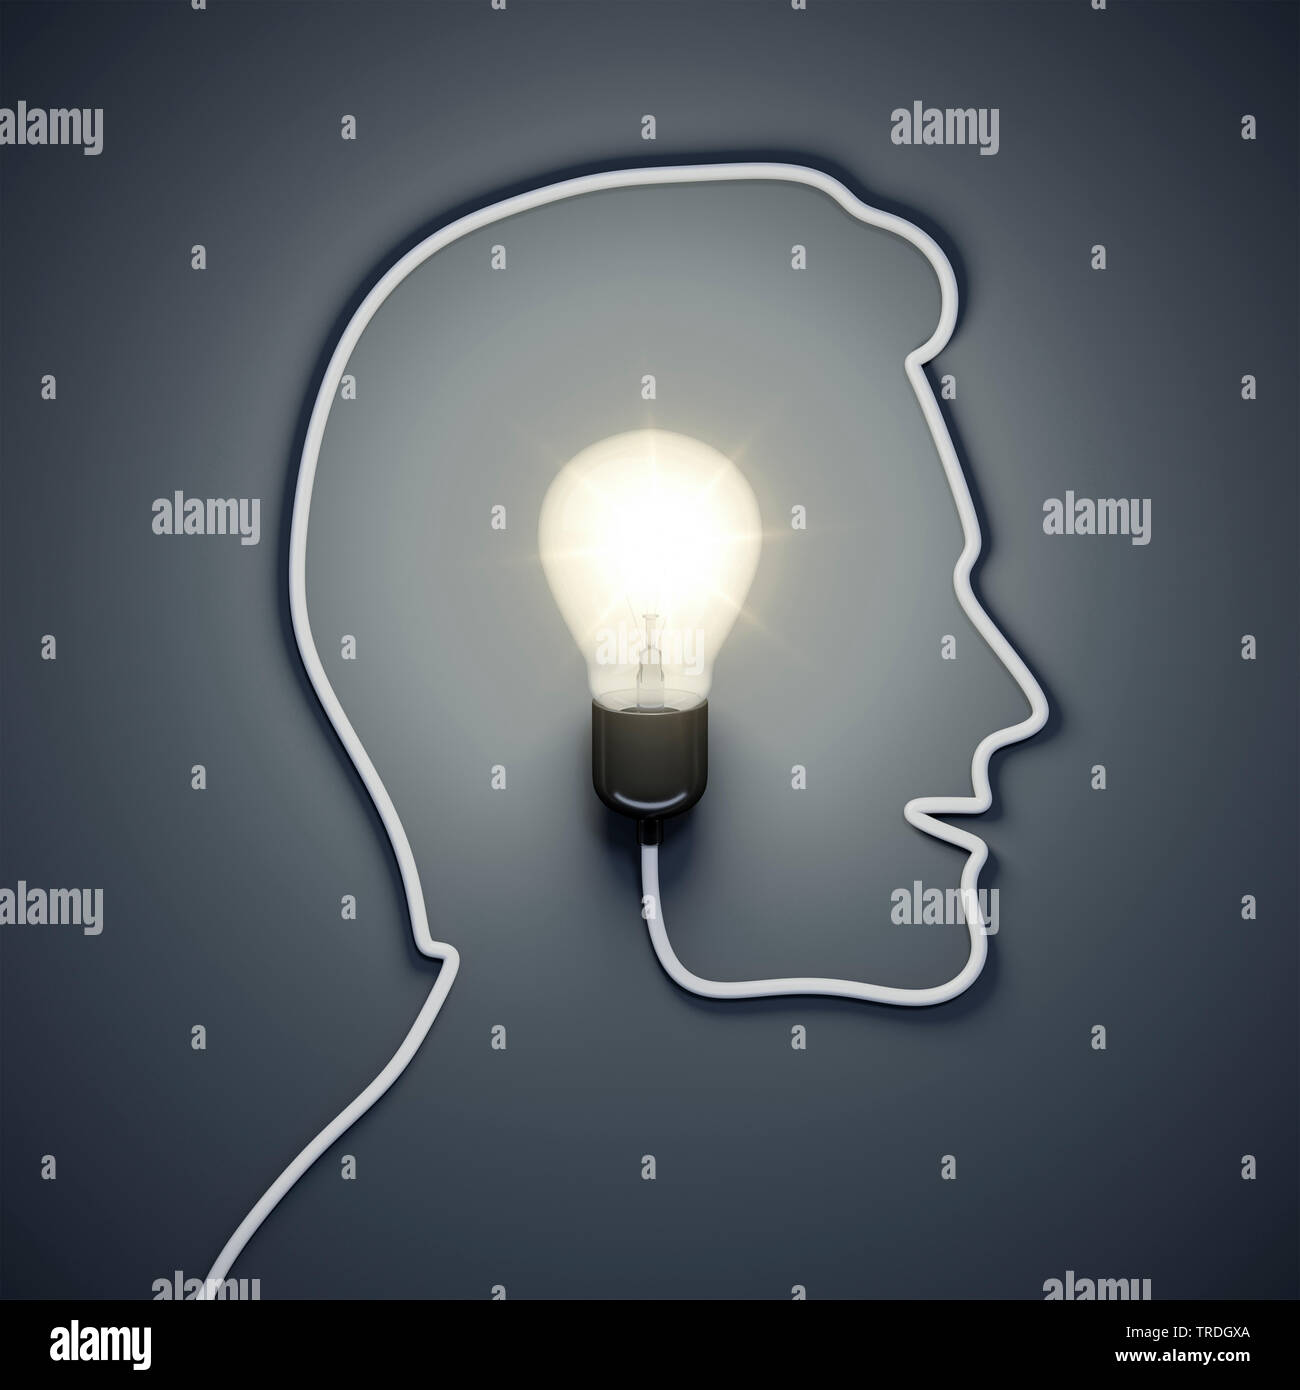 3D computer graphic, Face of a man shaped out of the power cable of a light bulb Stock Photo